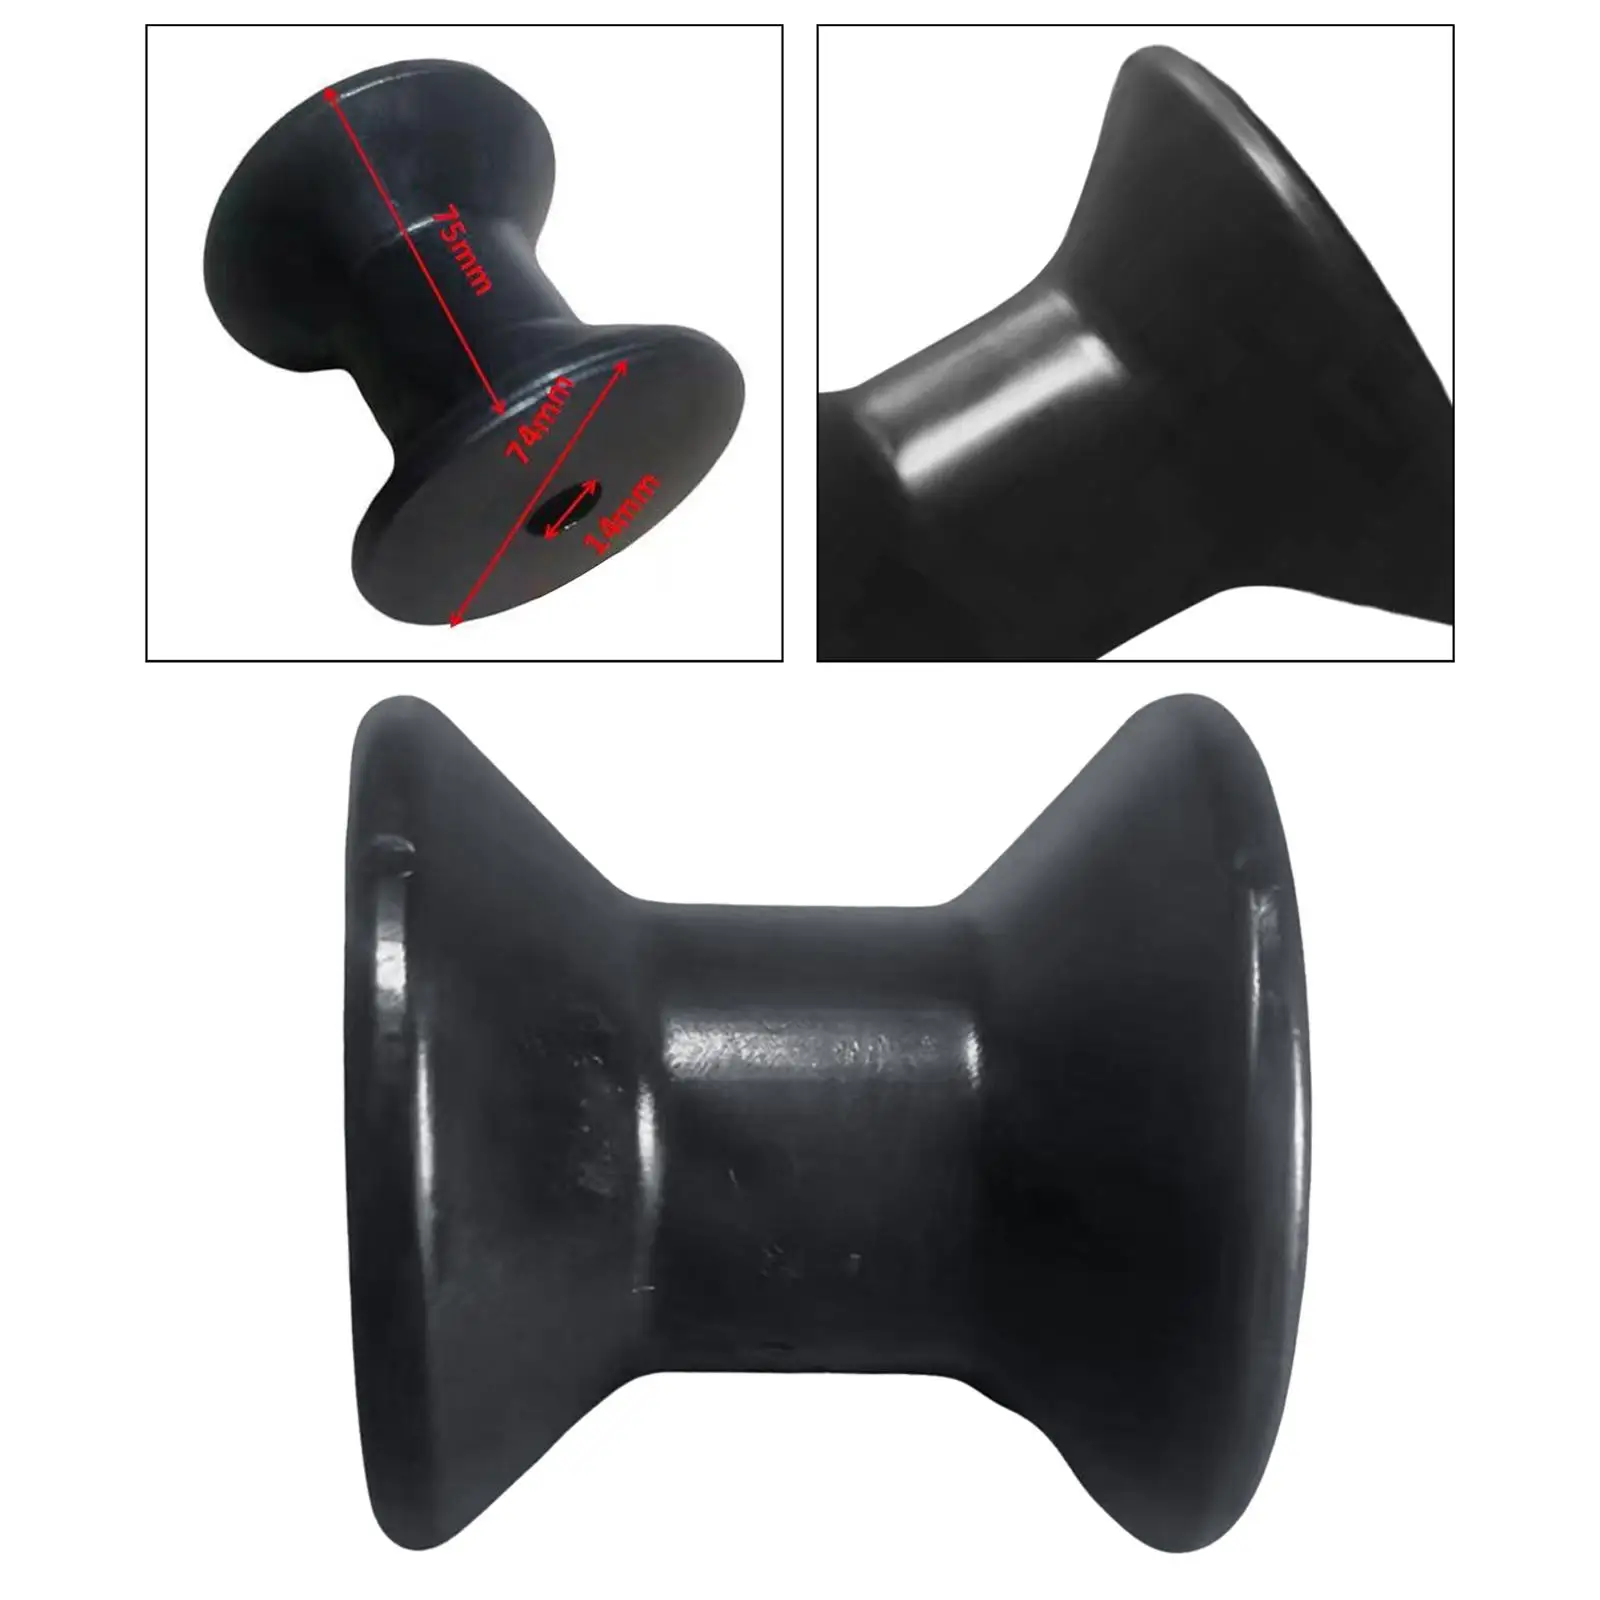 Boat Trailer Roller Accessories Parts Black Drag Reduction Repair for Ports, Warehouses Docks Factories Production Areas